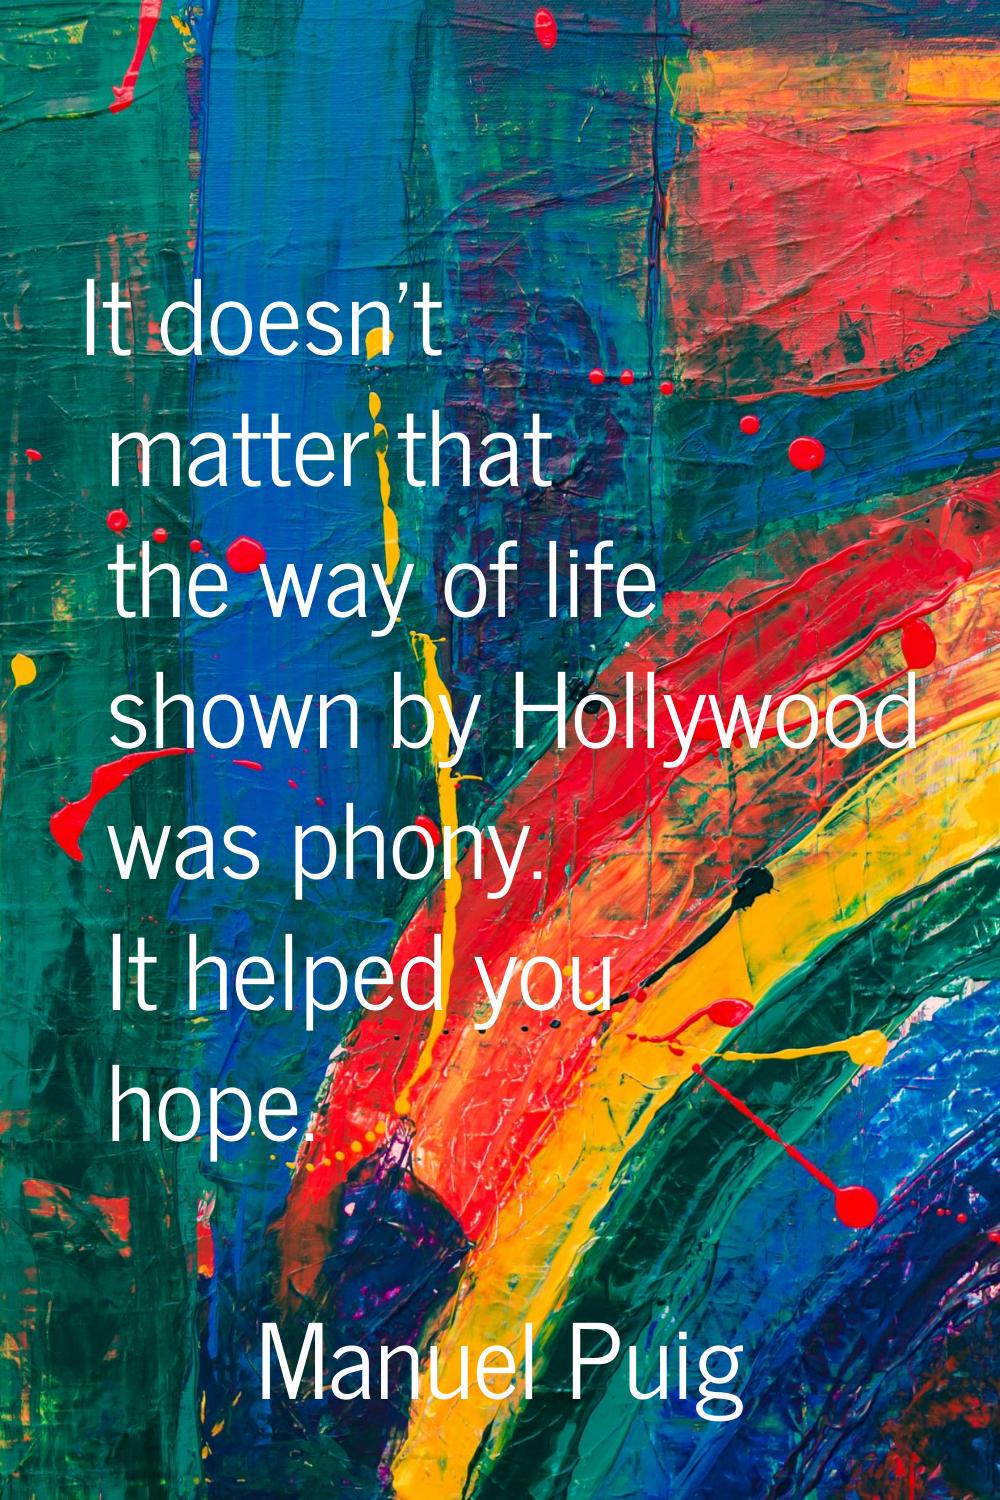 It doesn't matter that the way of life shown by Hollywood was phony. It helped you hope.